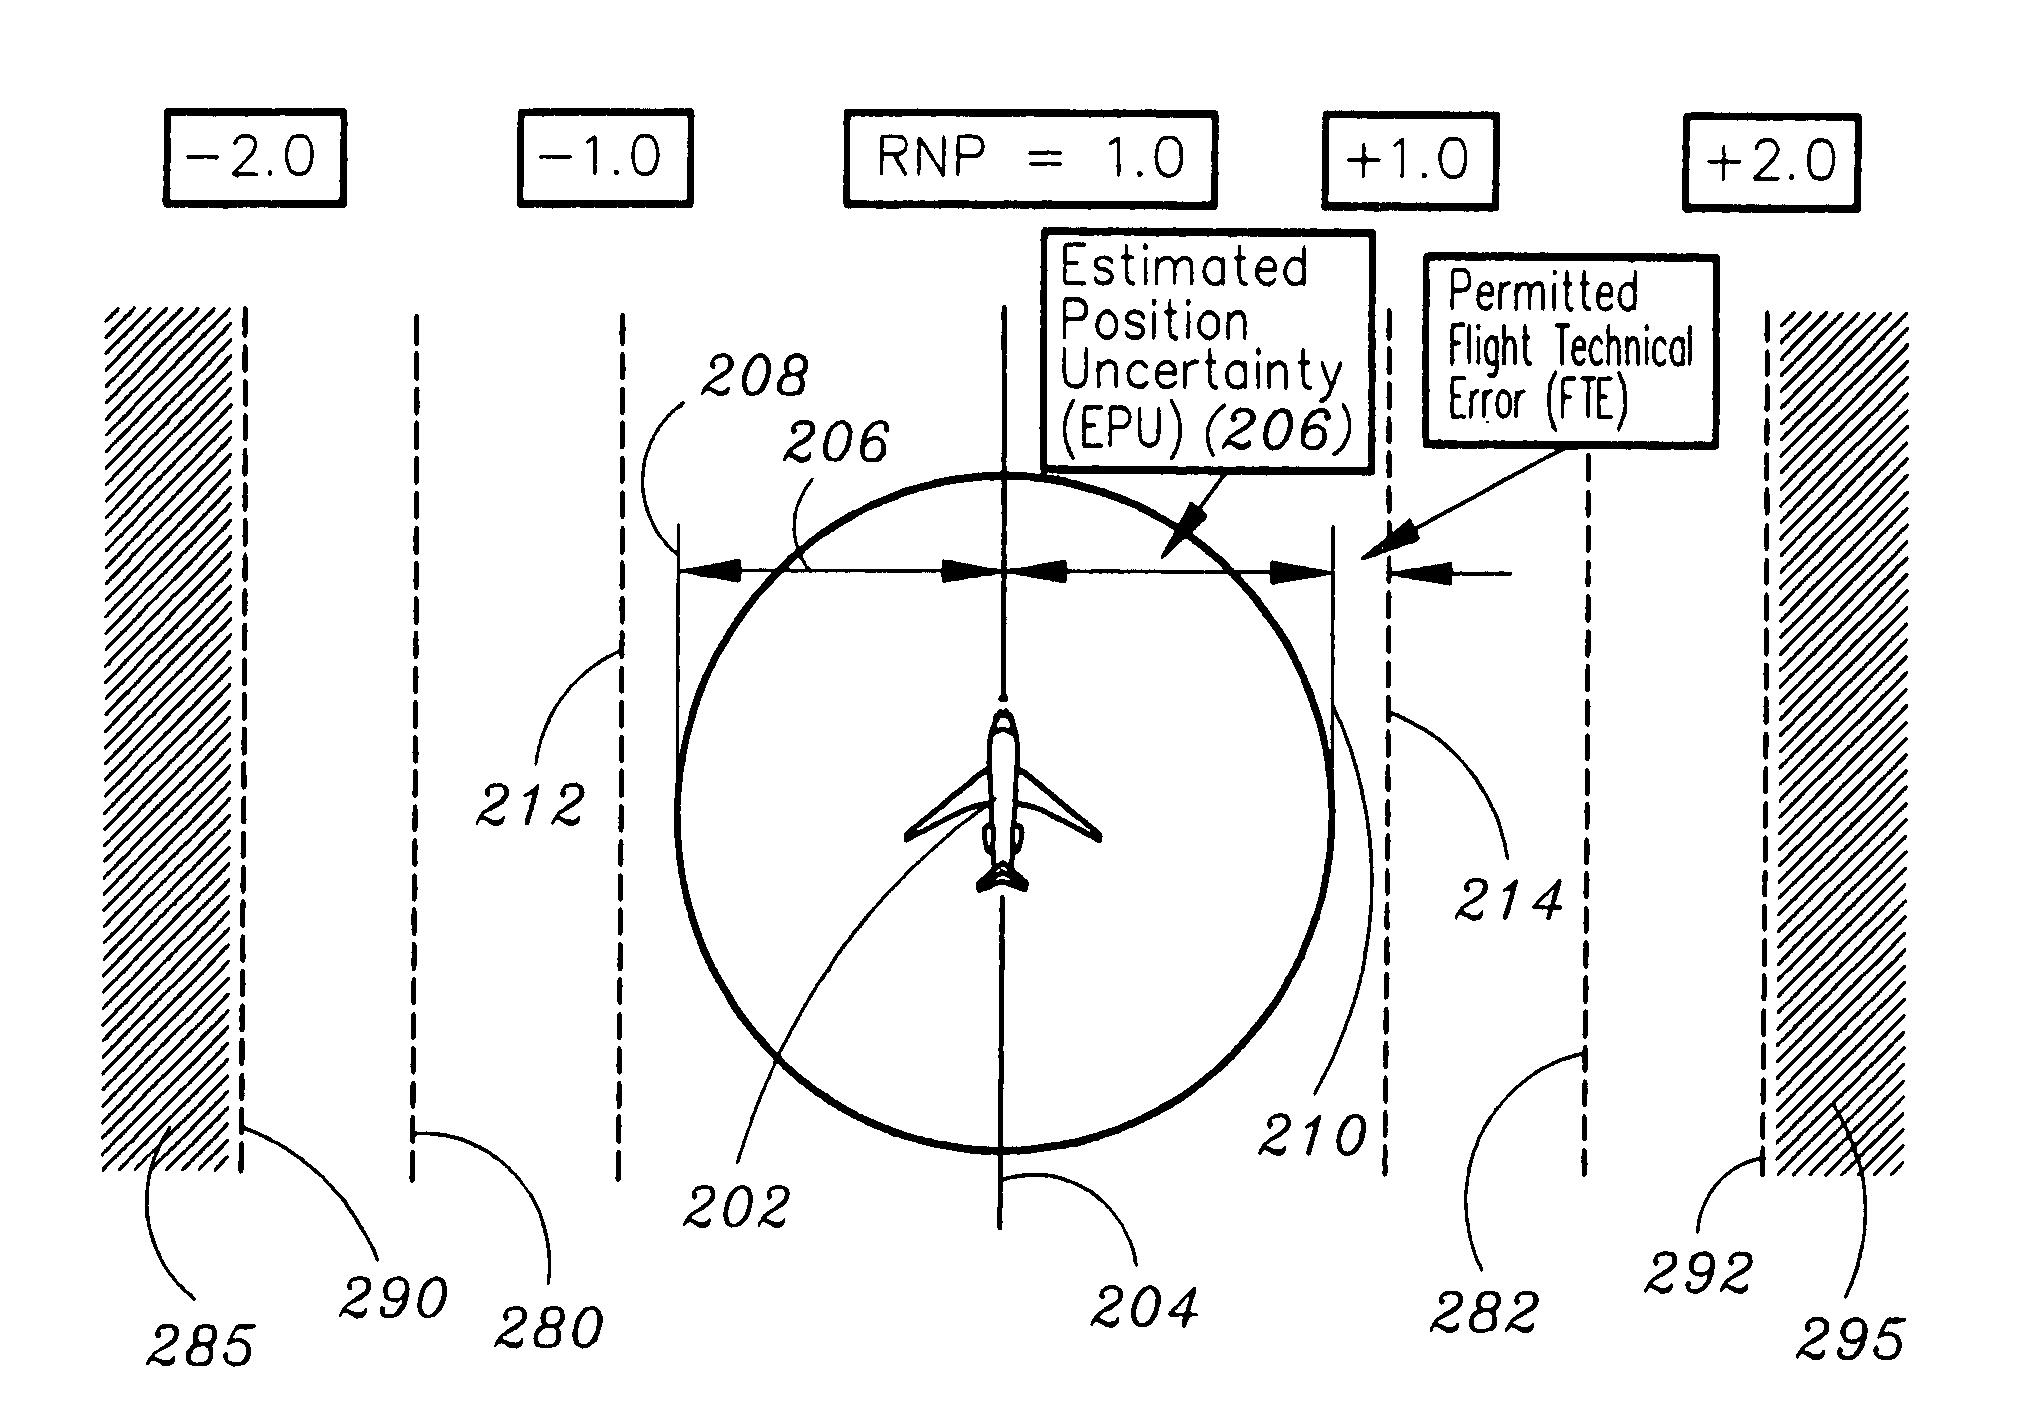 Required navigation performance (RNP) scales for indicating permissible flight technical error (FTE)